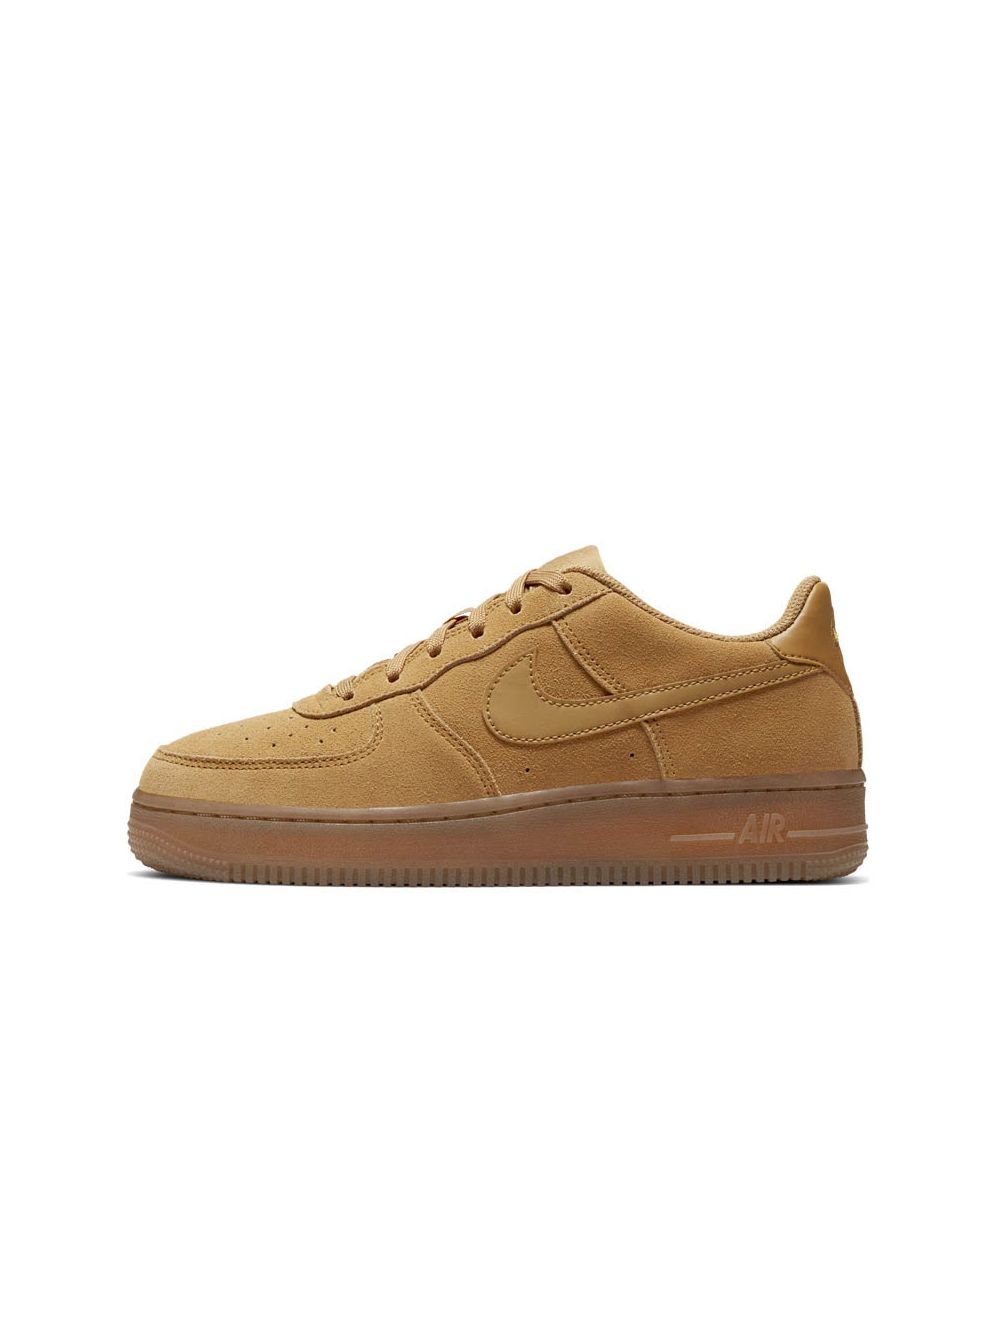 Shop Nike Air Force 1 LV8 3 Youth Shoes Brown | Studio 88